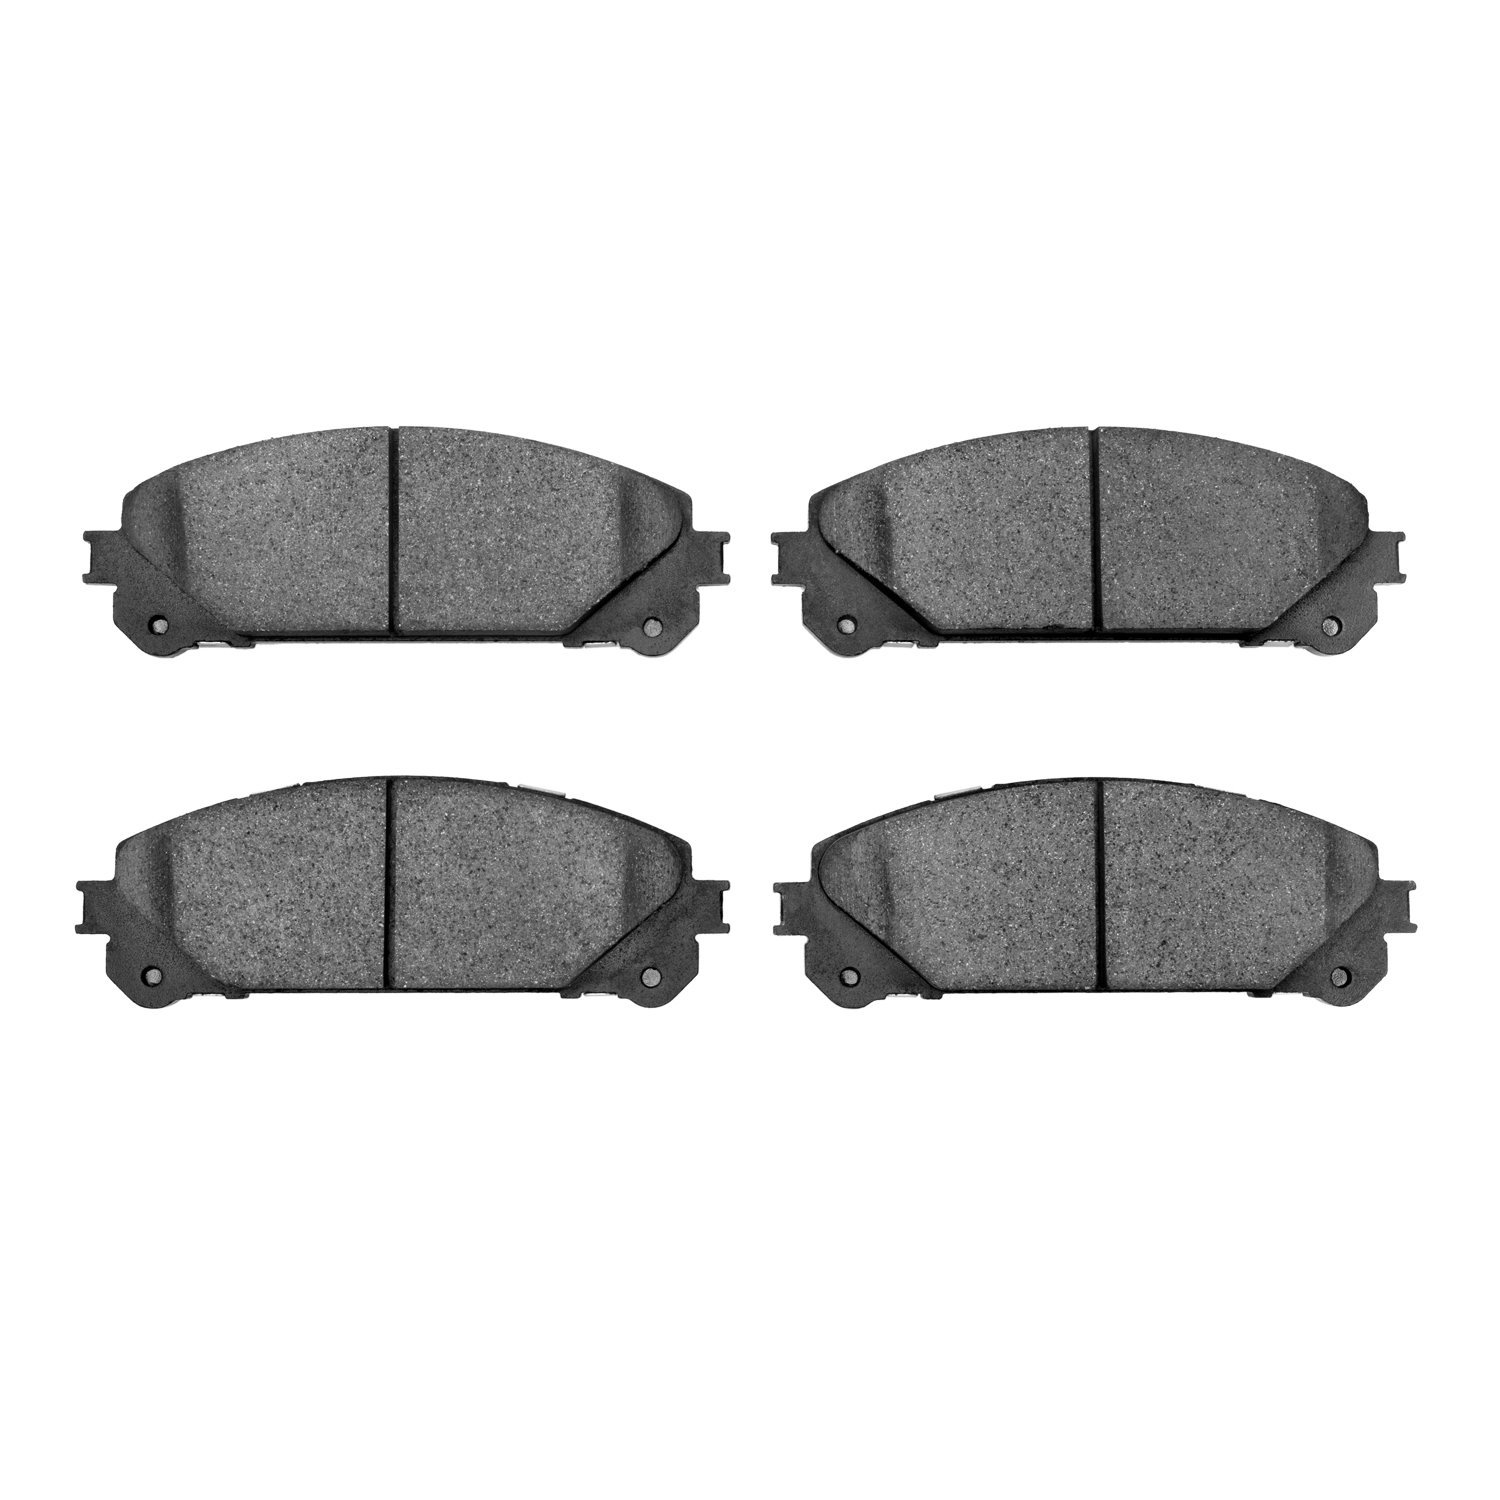 1310-1324-00 3000-Series Ceramic Brake Pads, Fits Select Multiple Makes/Models, Position: Front